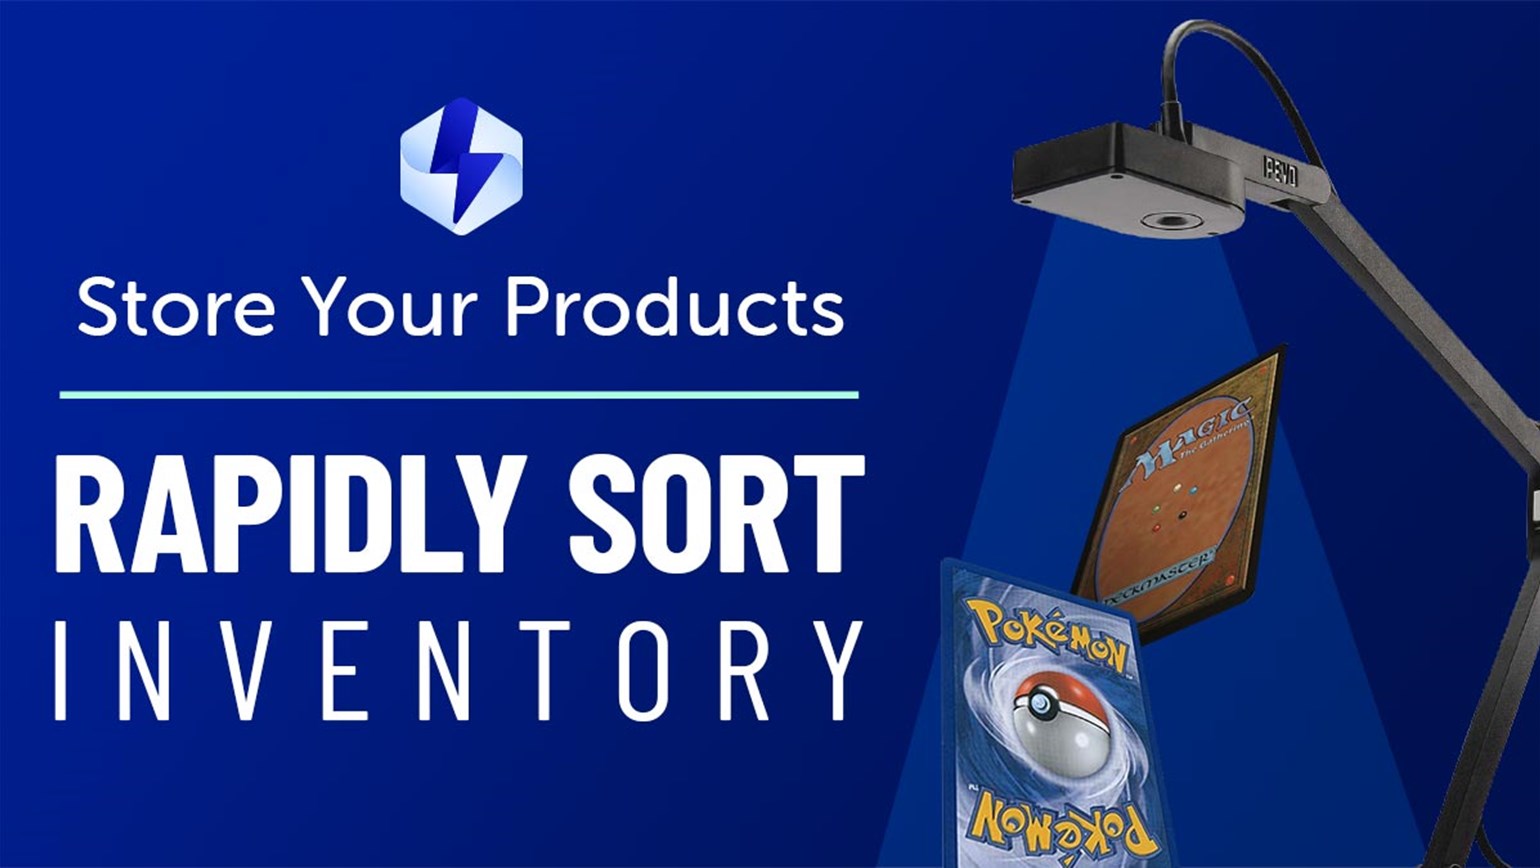 Rapidly Sort Your Inventory for Store Your Products